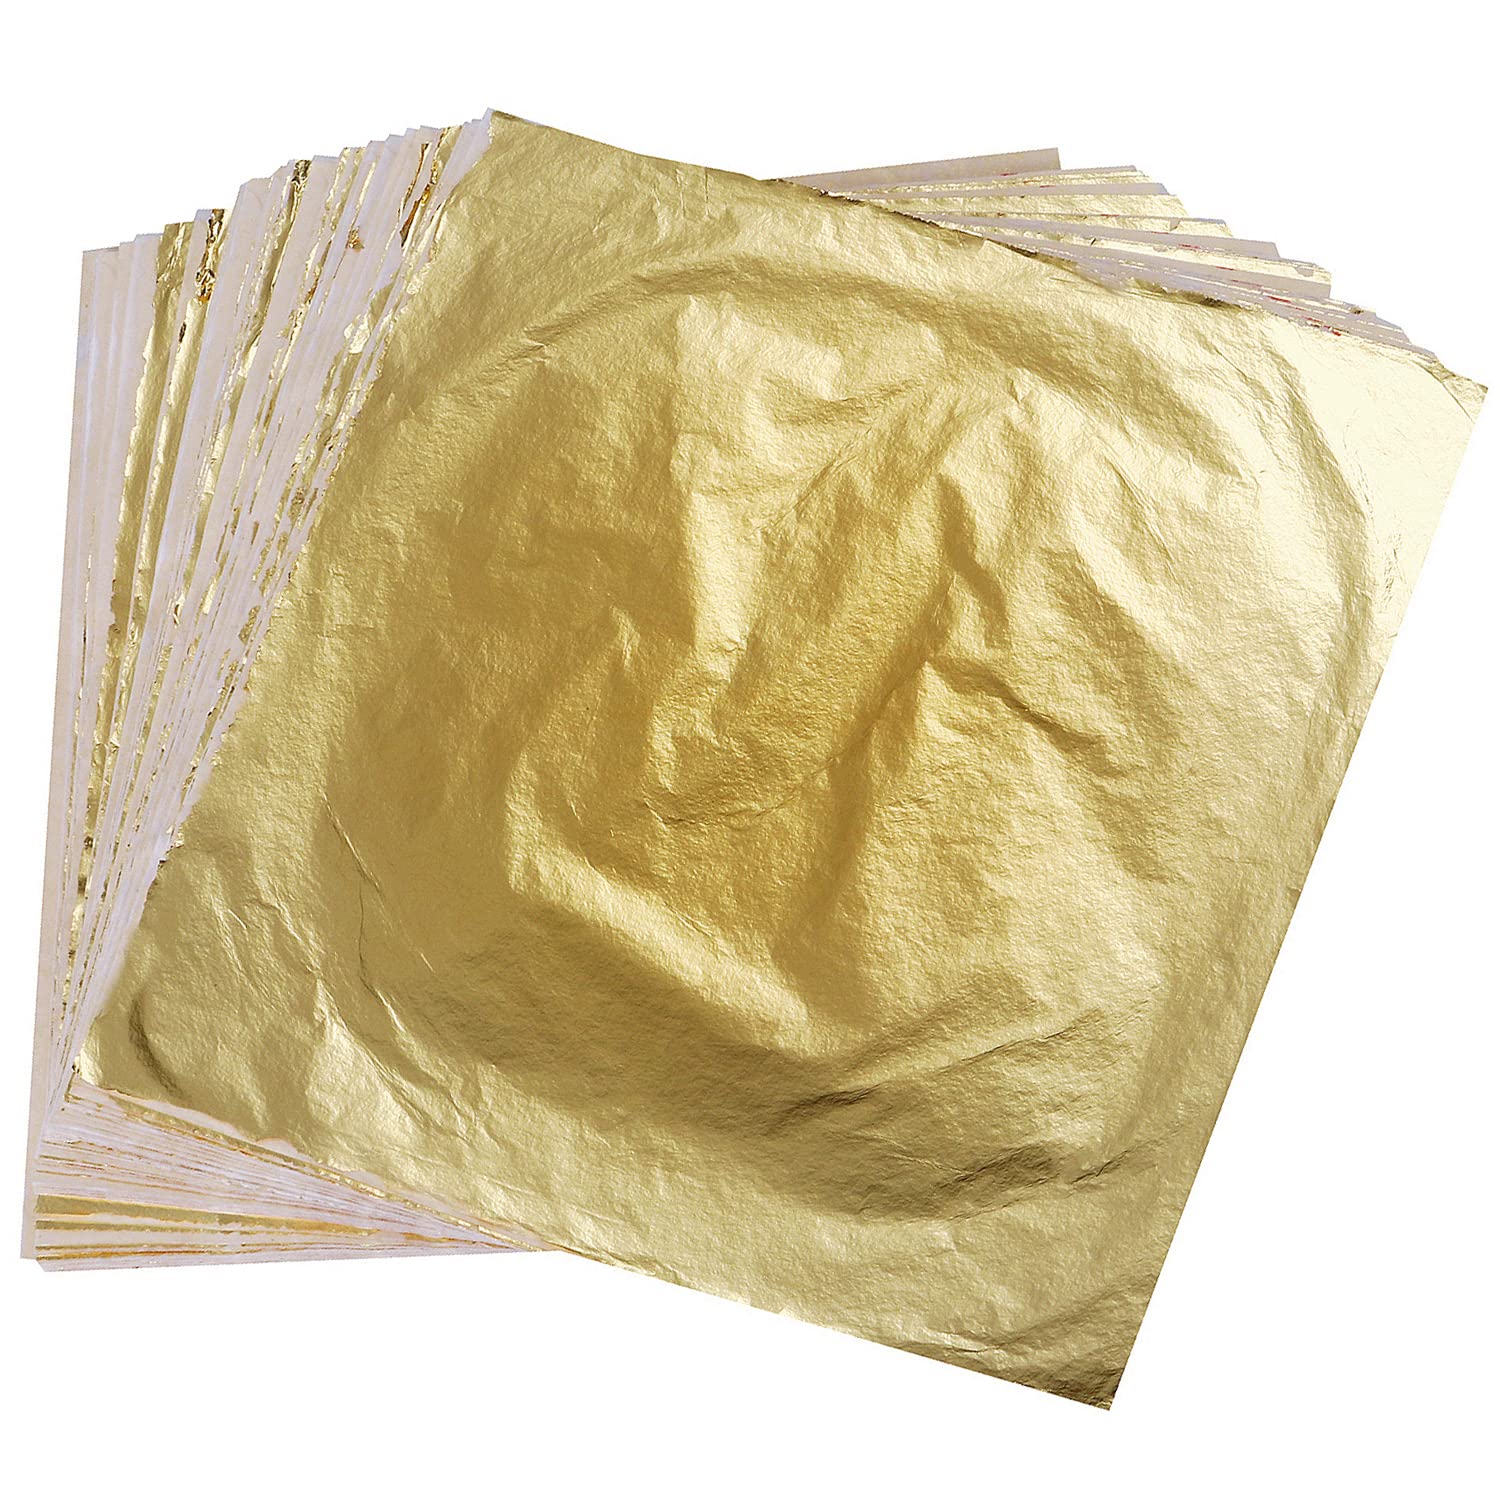 100 Sheets Imitation Gold Leaf for Painting, Arts, Gilding Crafting,  Decoration, 5.5 by 5.5 Inches Imitation Gold Foil Sheets